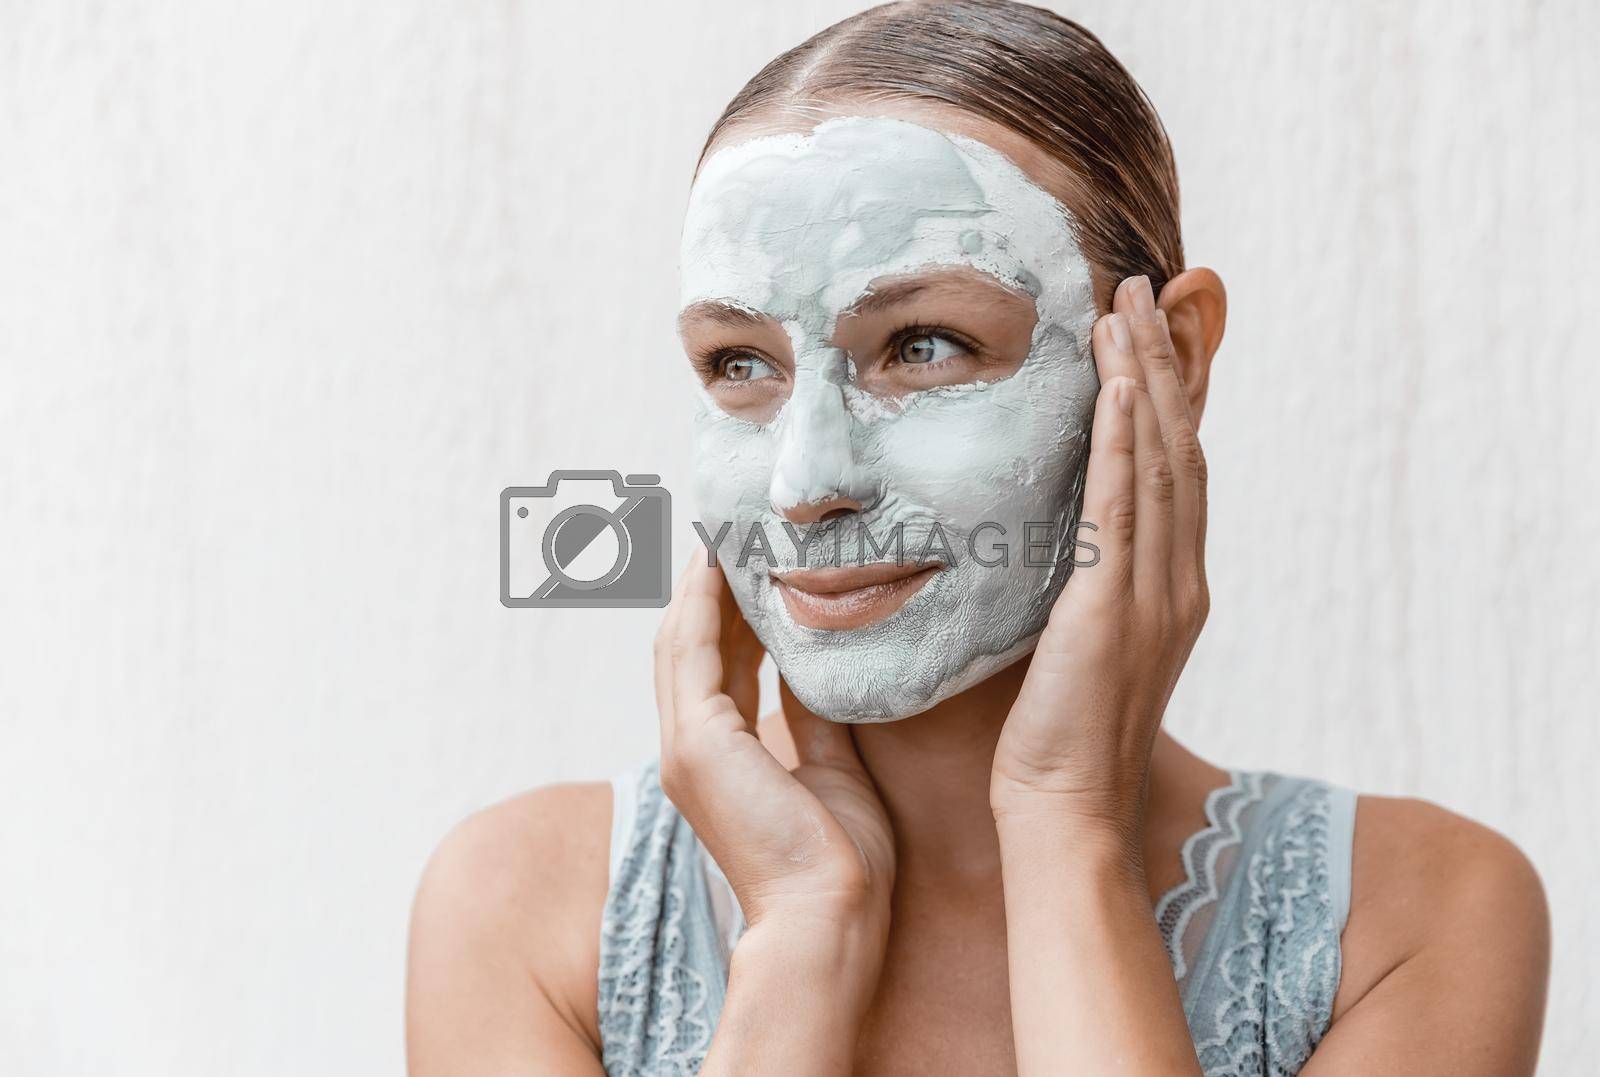 Royalty free image of Beautiful Woman Using Facial Mask by Anna_Omelchenko